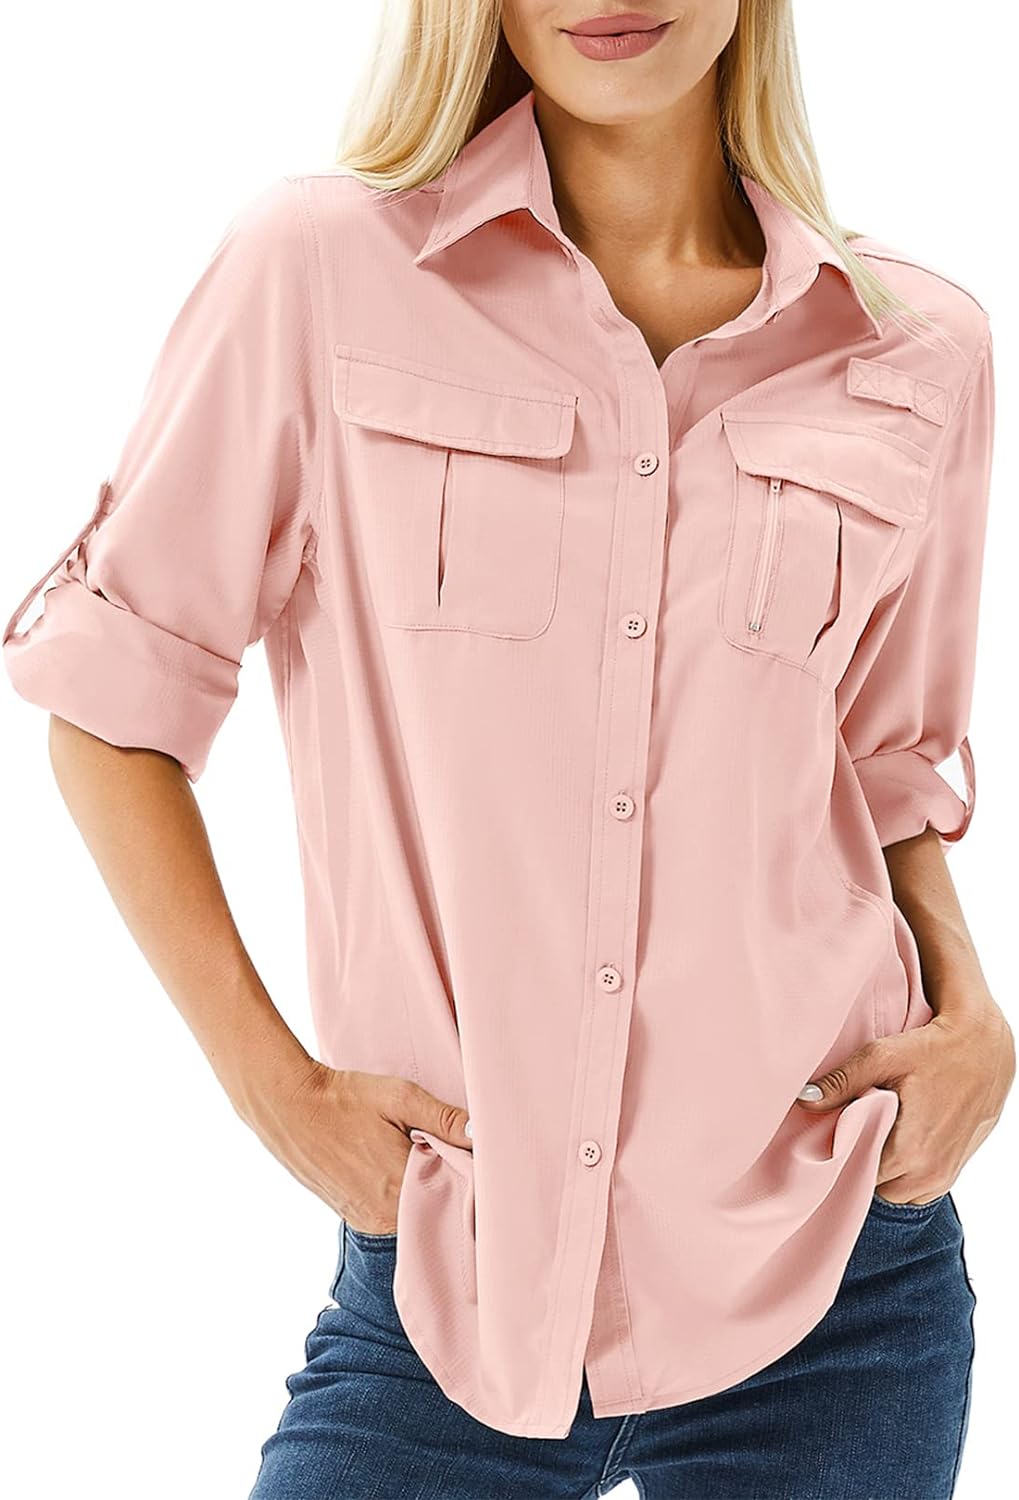 Women's UPF 50 Long Sleeve Outdoor Safari Shirt for Sun Protection and  Quick Dry